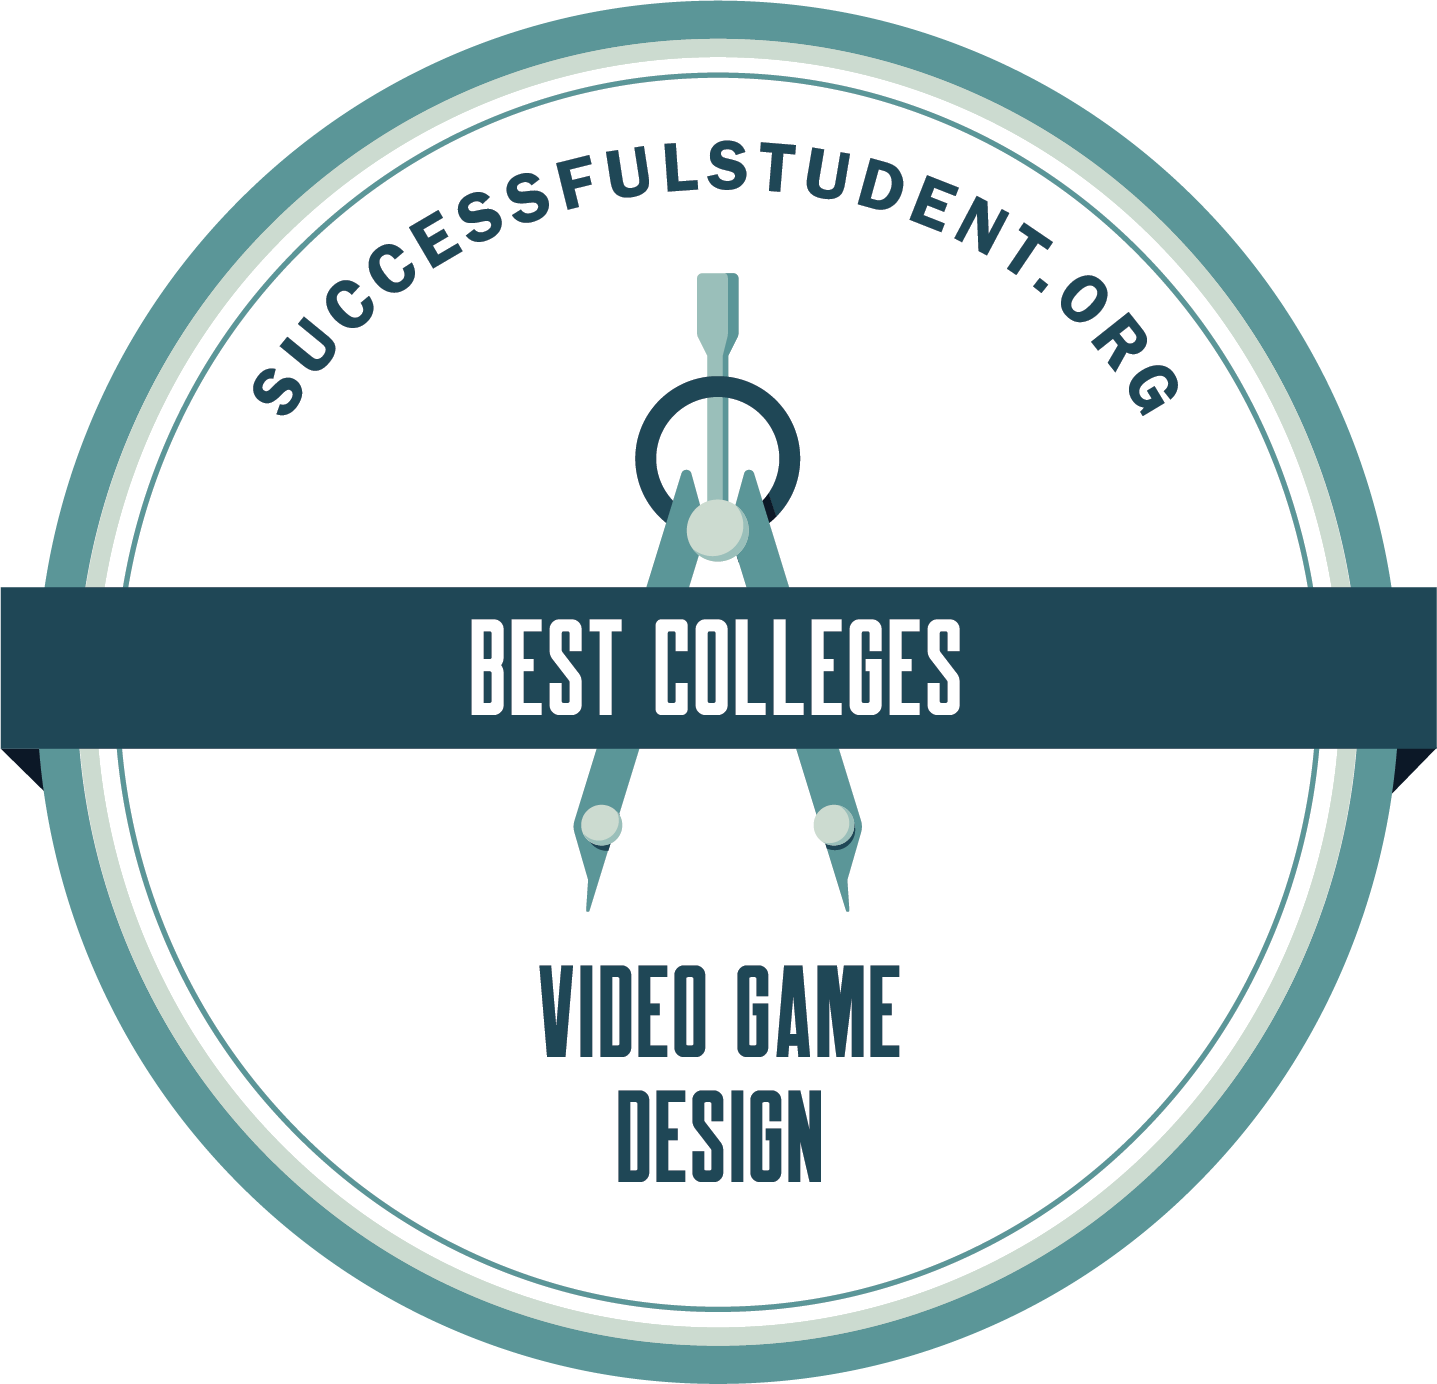 The 50 Best Video Game Design Colleges's Badge